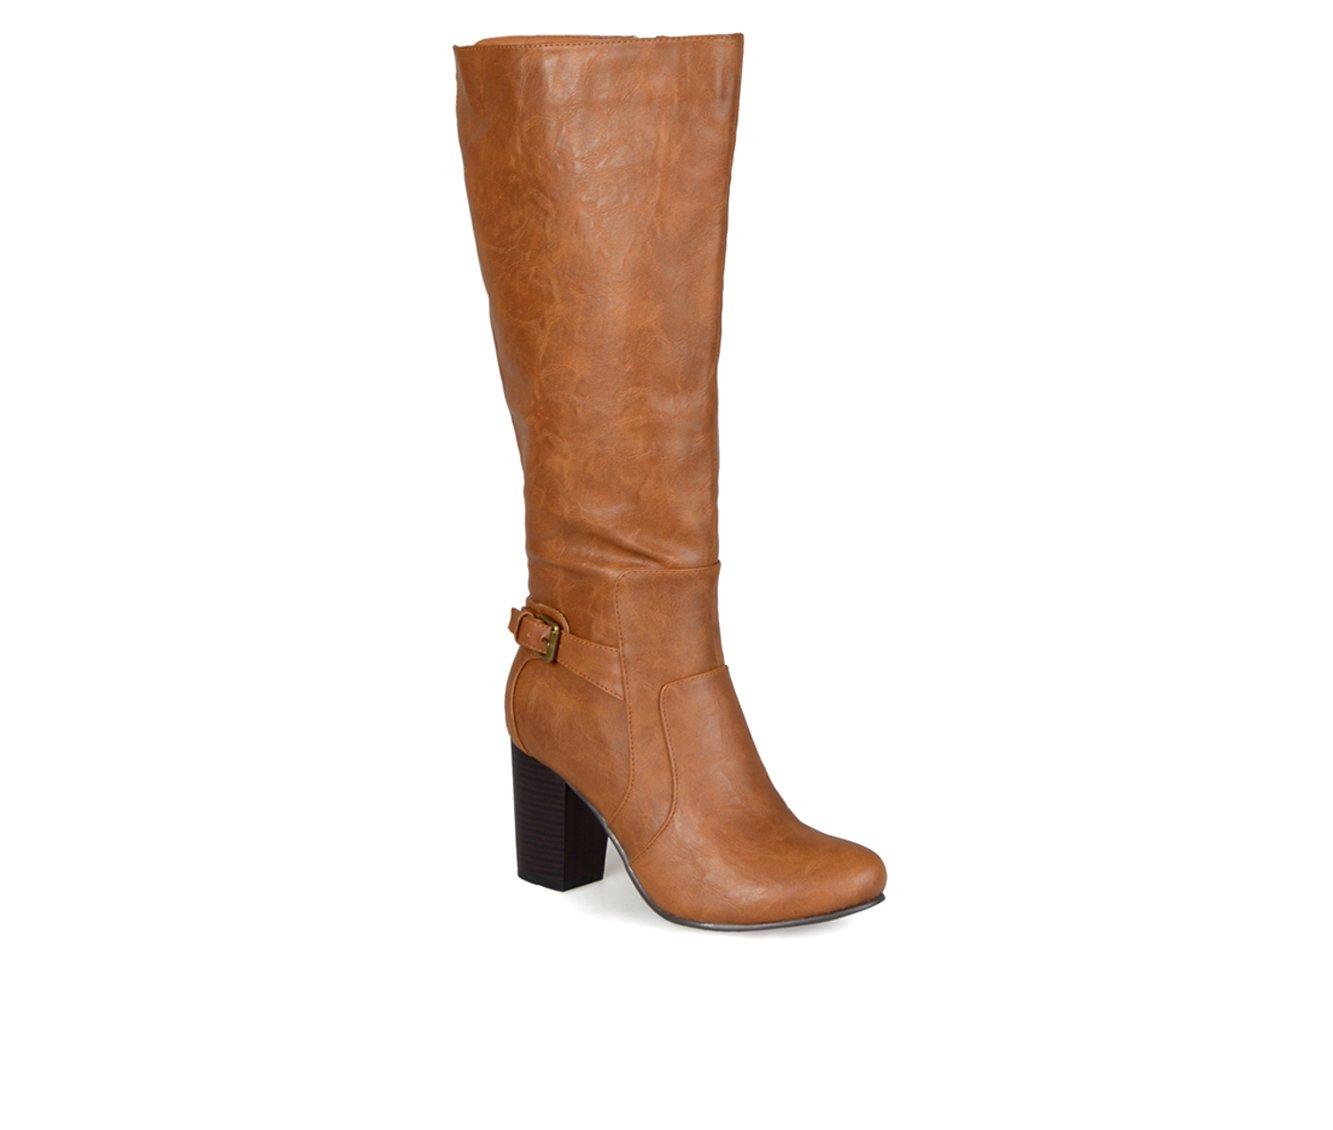 Women's Journee Collection Carver Wide Calf Knee High Boots